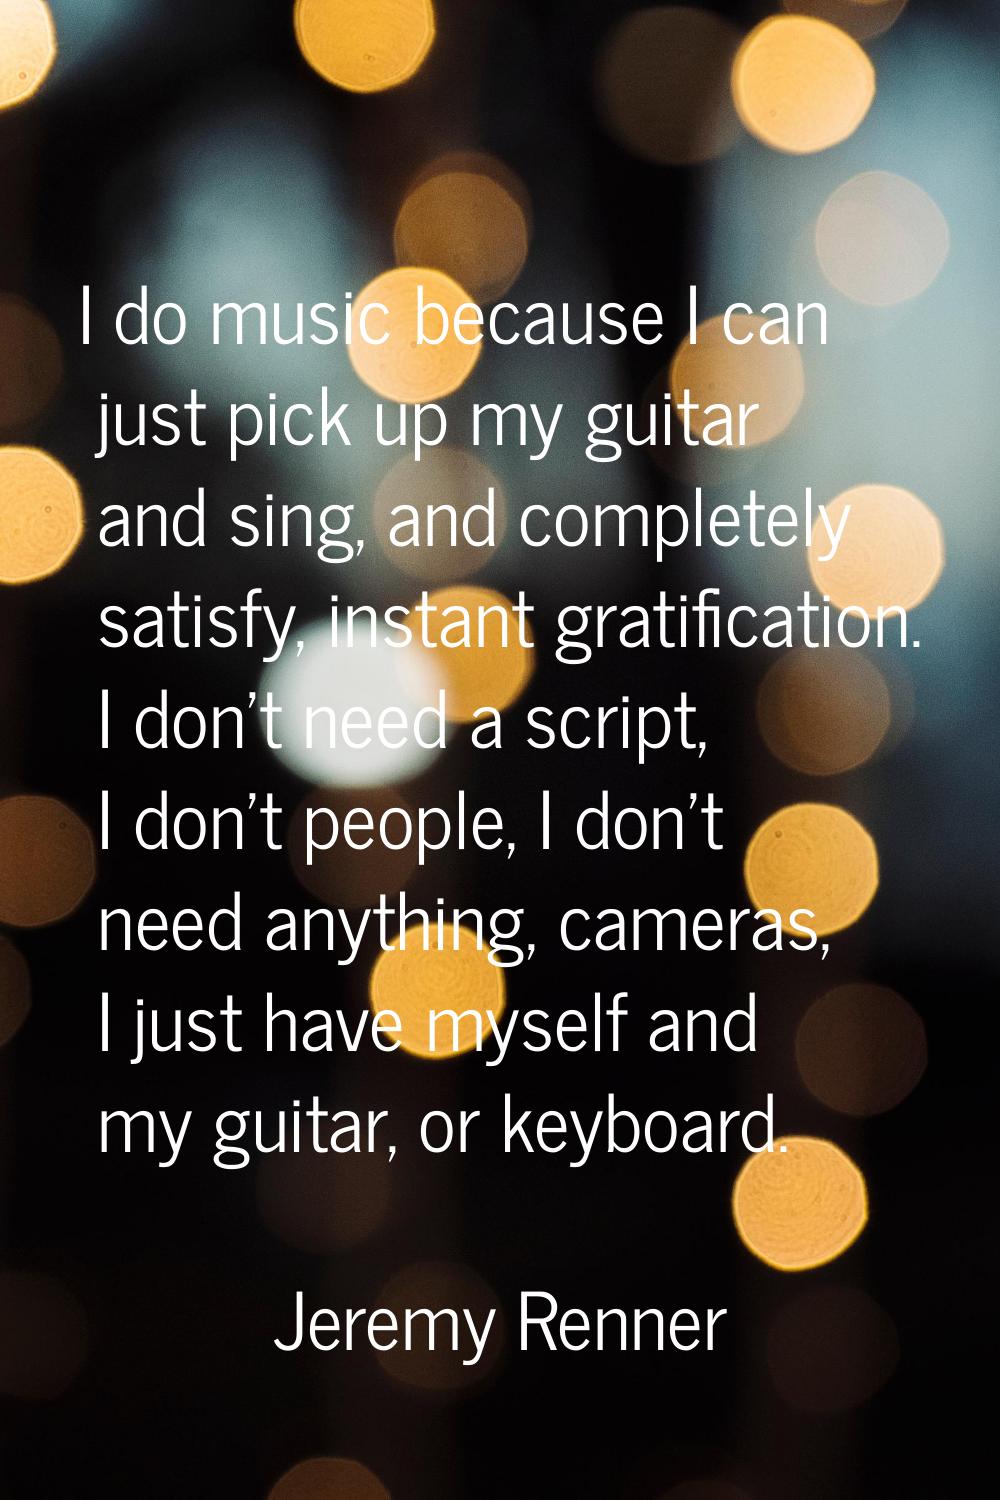 I do music because I can just pick up my guitar and sing, and completely satisfy, instant gratifica